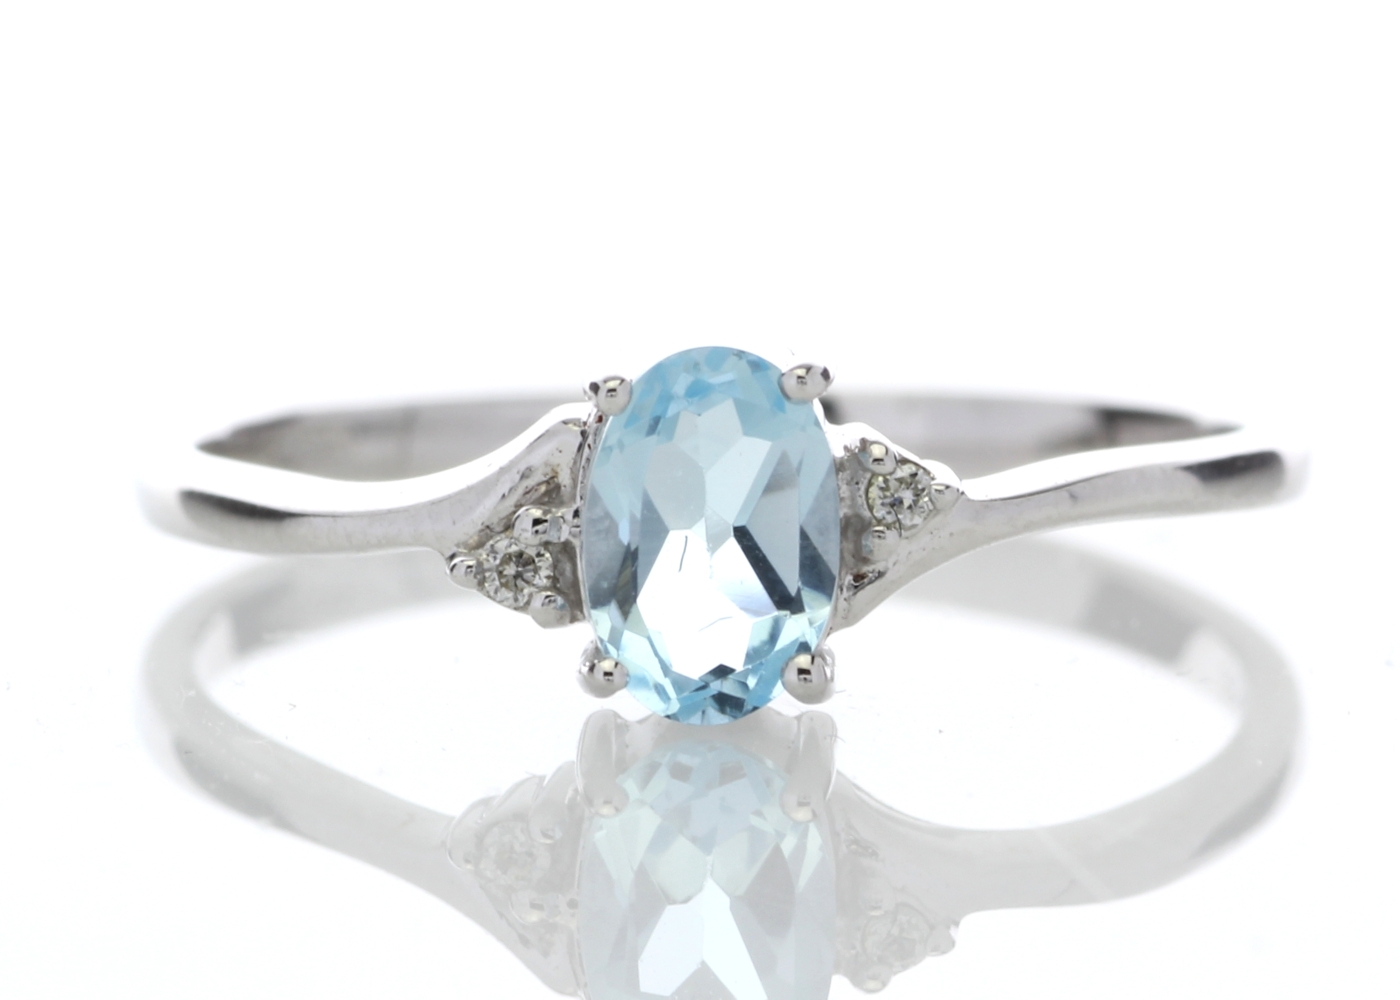 9ct White Gold Diamond and Oval Shape Blue Topaz Ring - Image 5 of 8